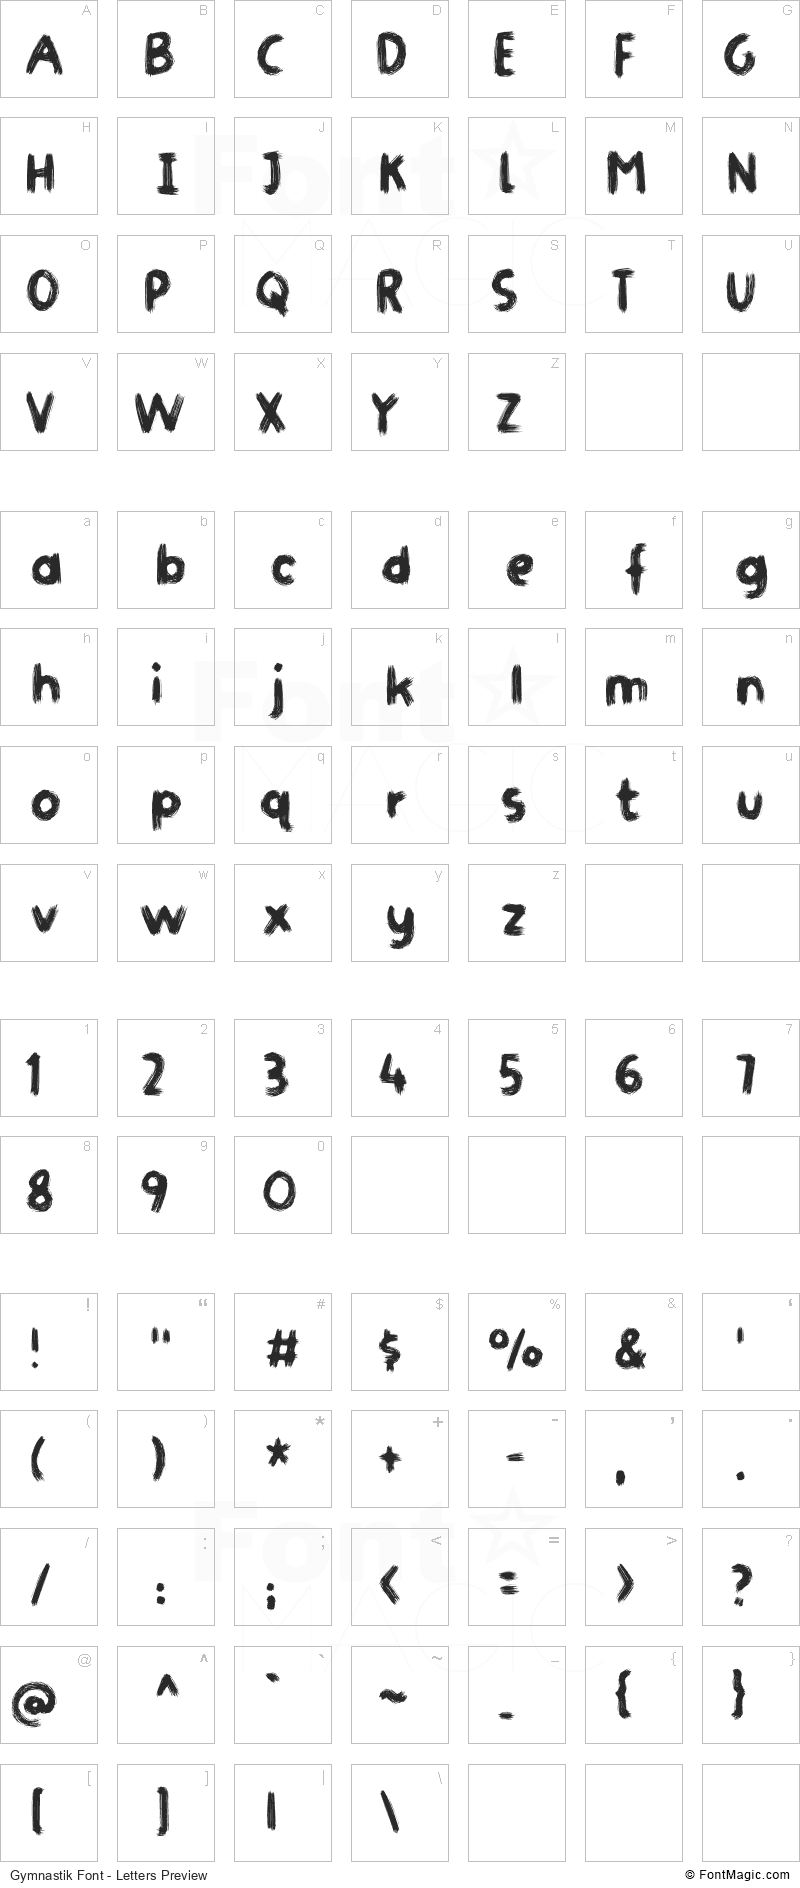 Gymnastik Font - All Latters Preview Chart